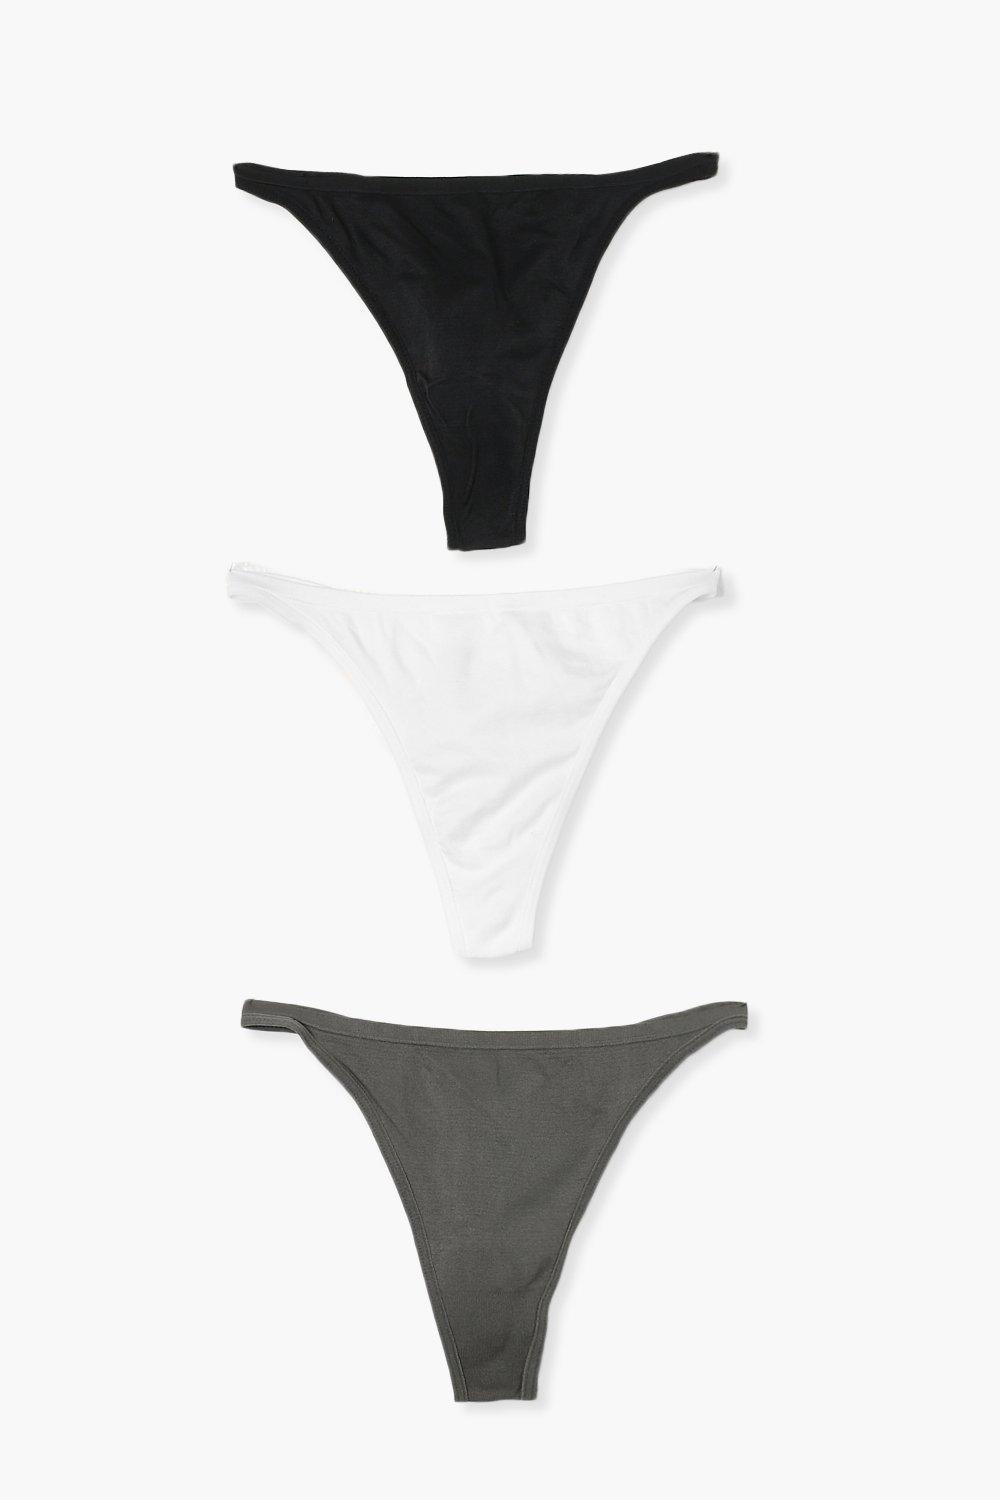 Dip Invisible Lined Thong Womens- M, 3 pk - King Soopers